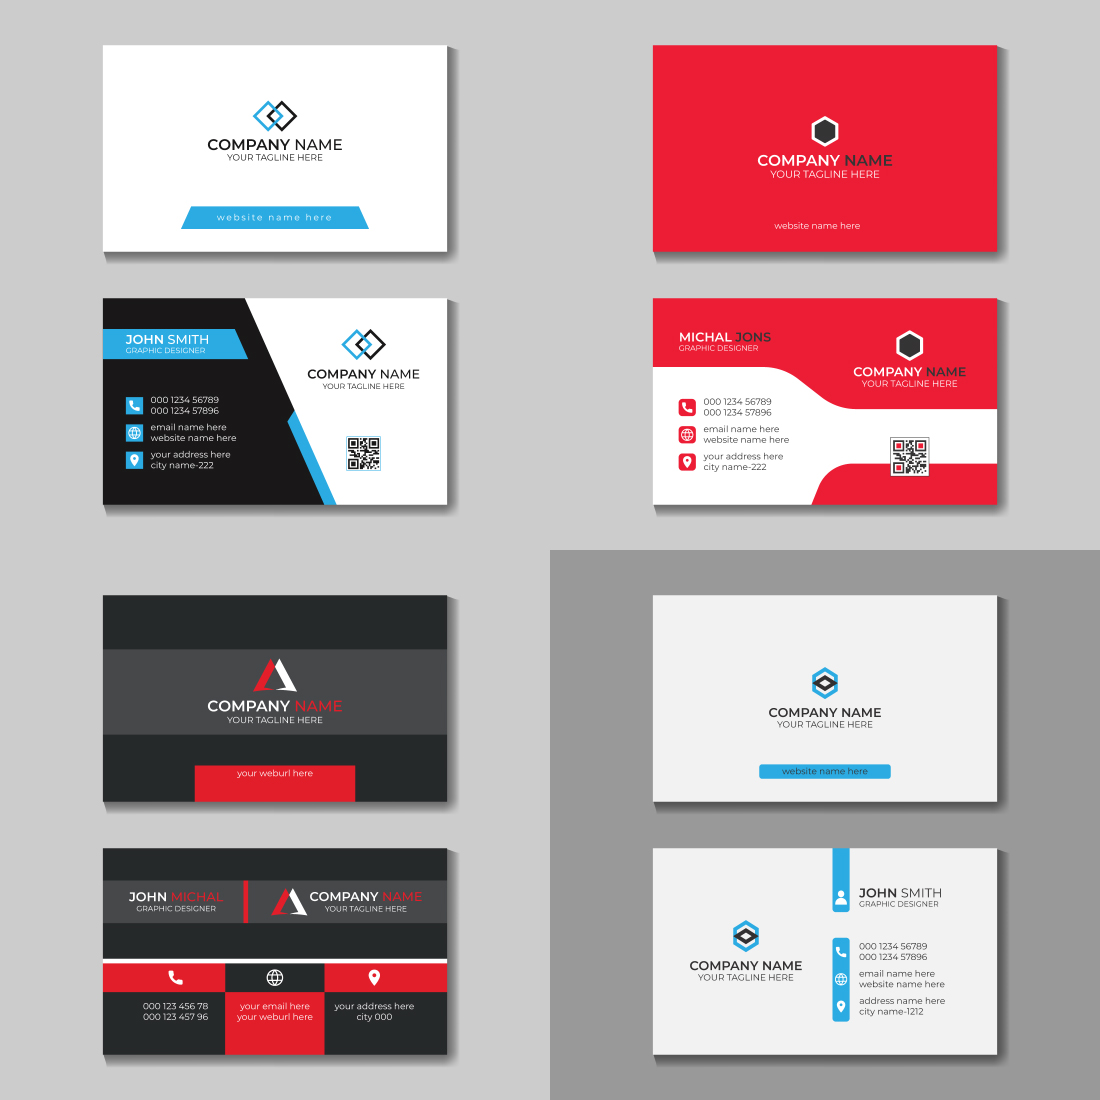 preview image 4 Stylish and Professional Business Card Design Templates